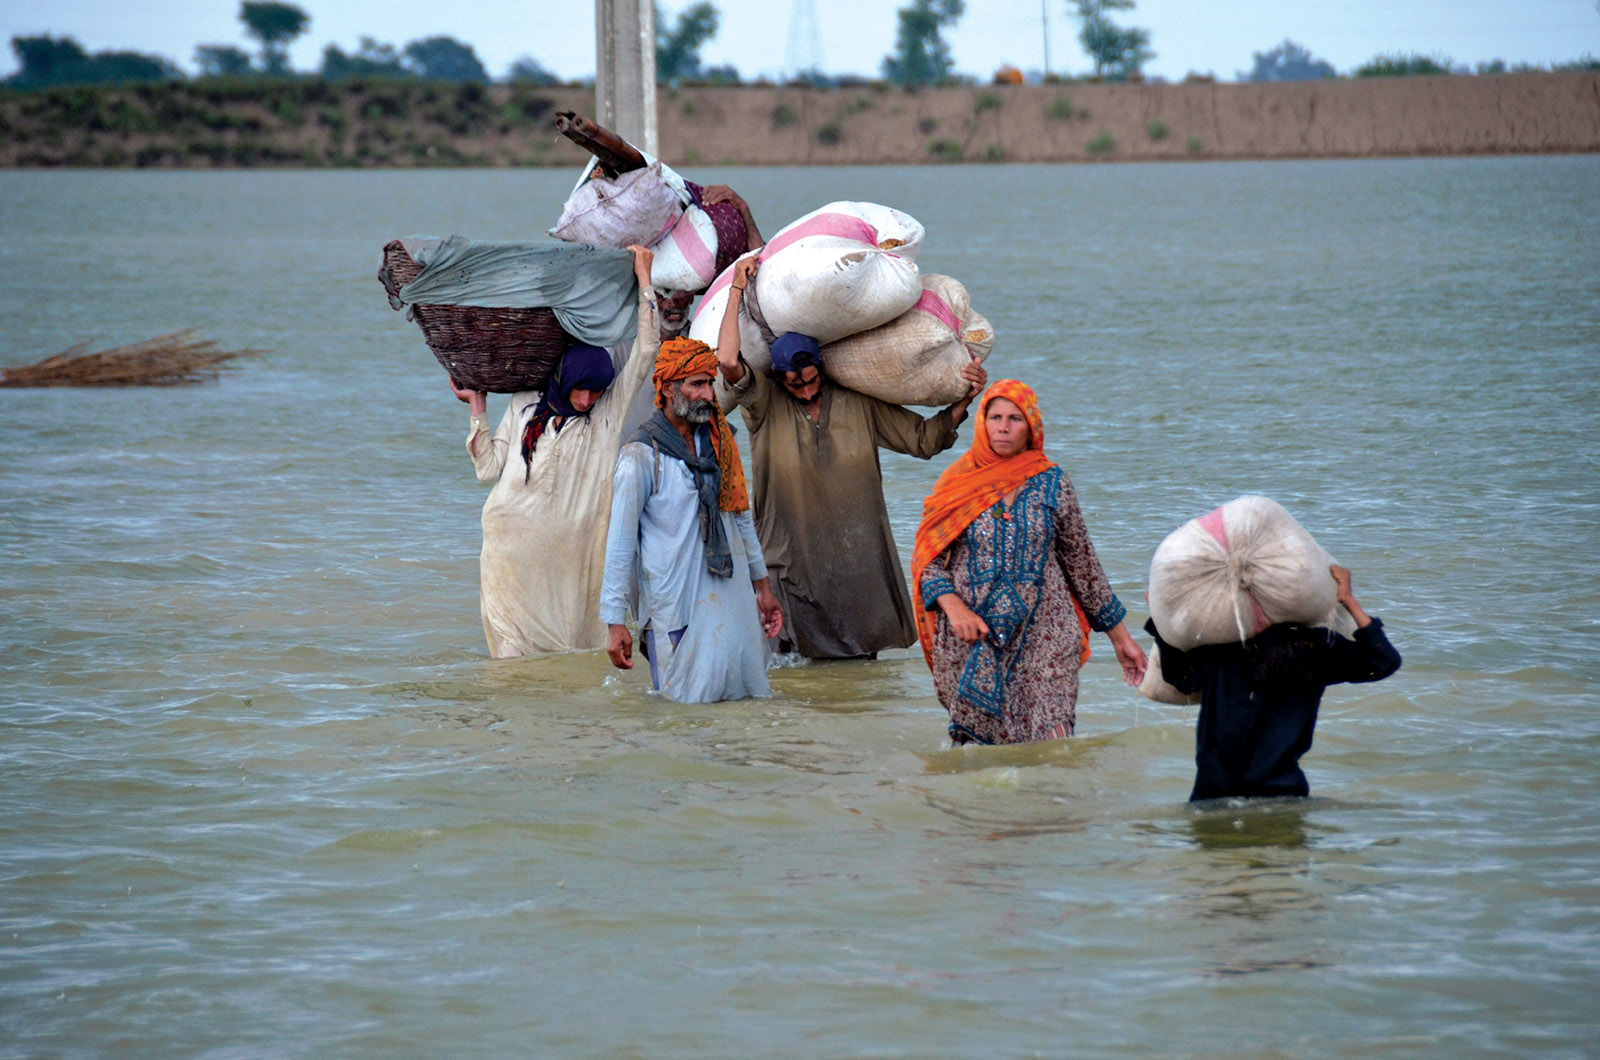 A displaced family wading through floodwaters, Jafarabad, Pakistan